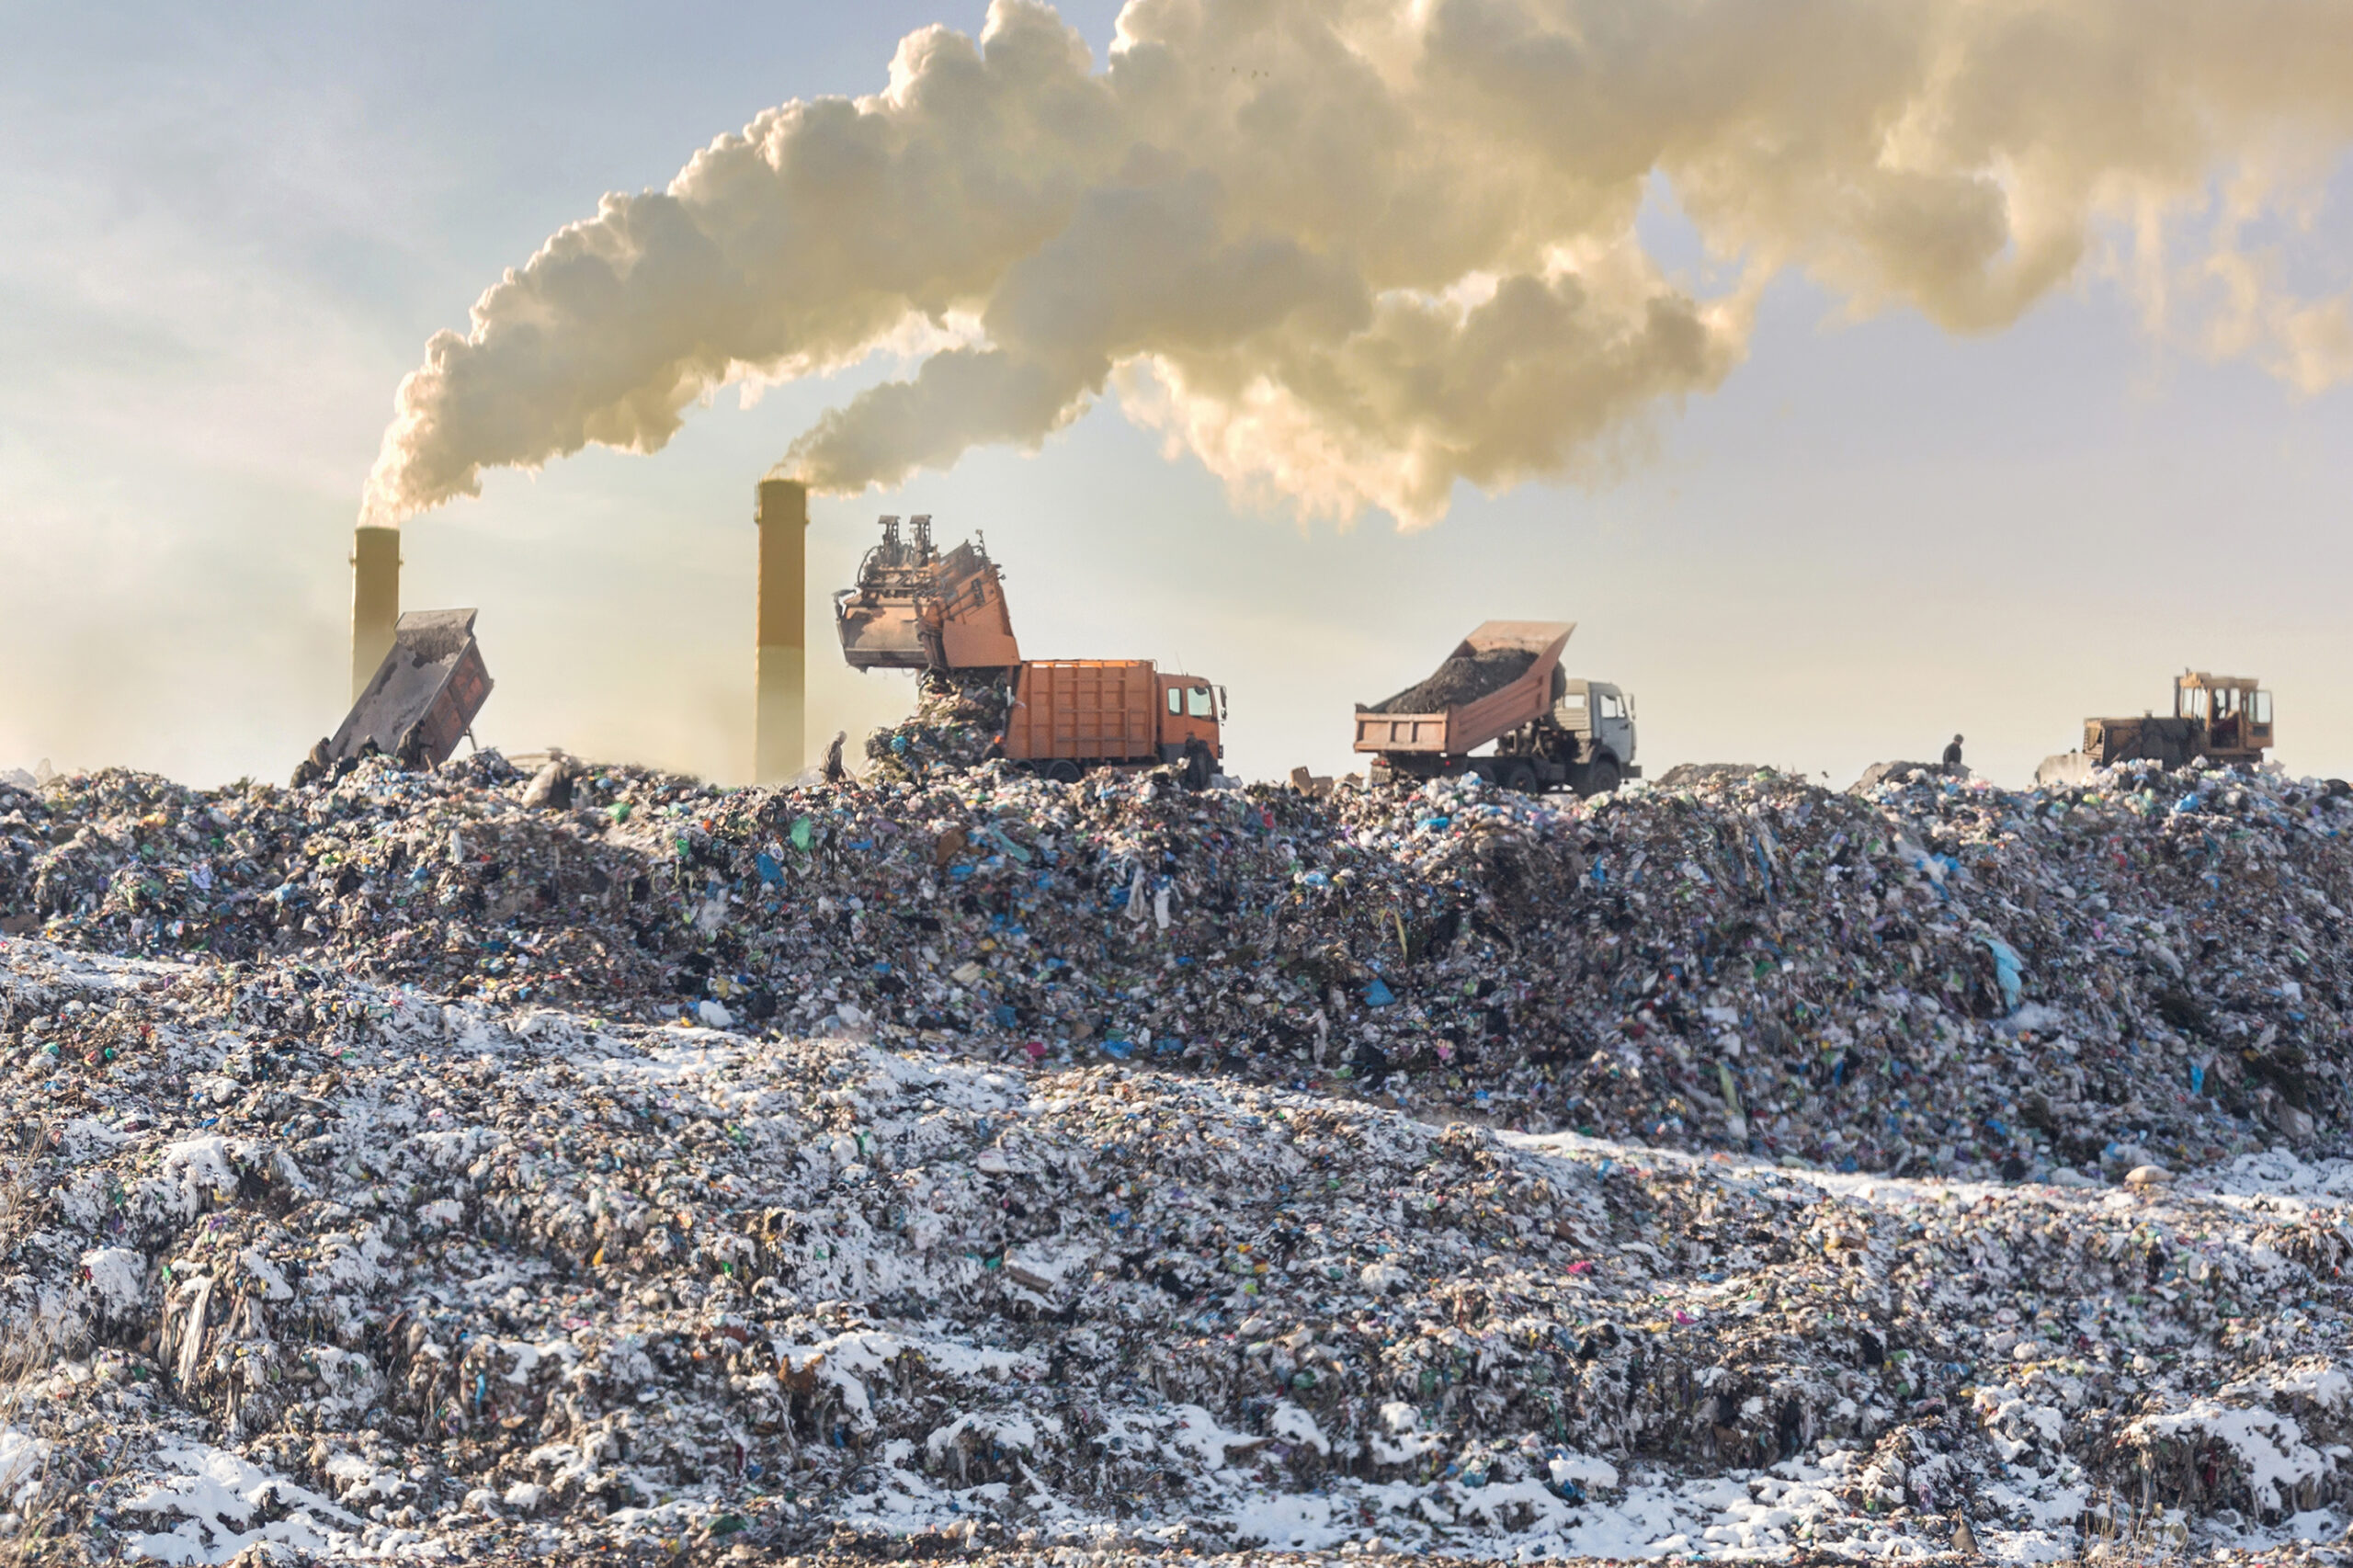 What Is The Main Problem Caused By Landfill Tax